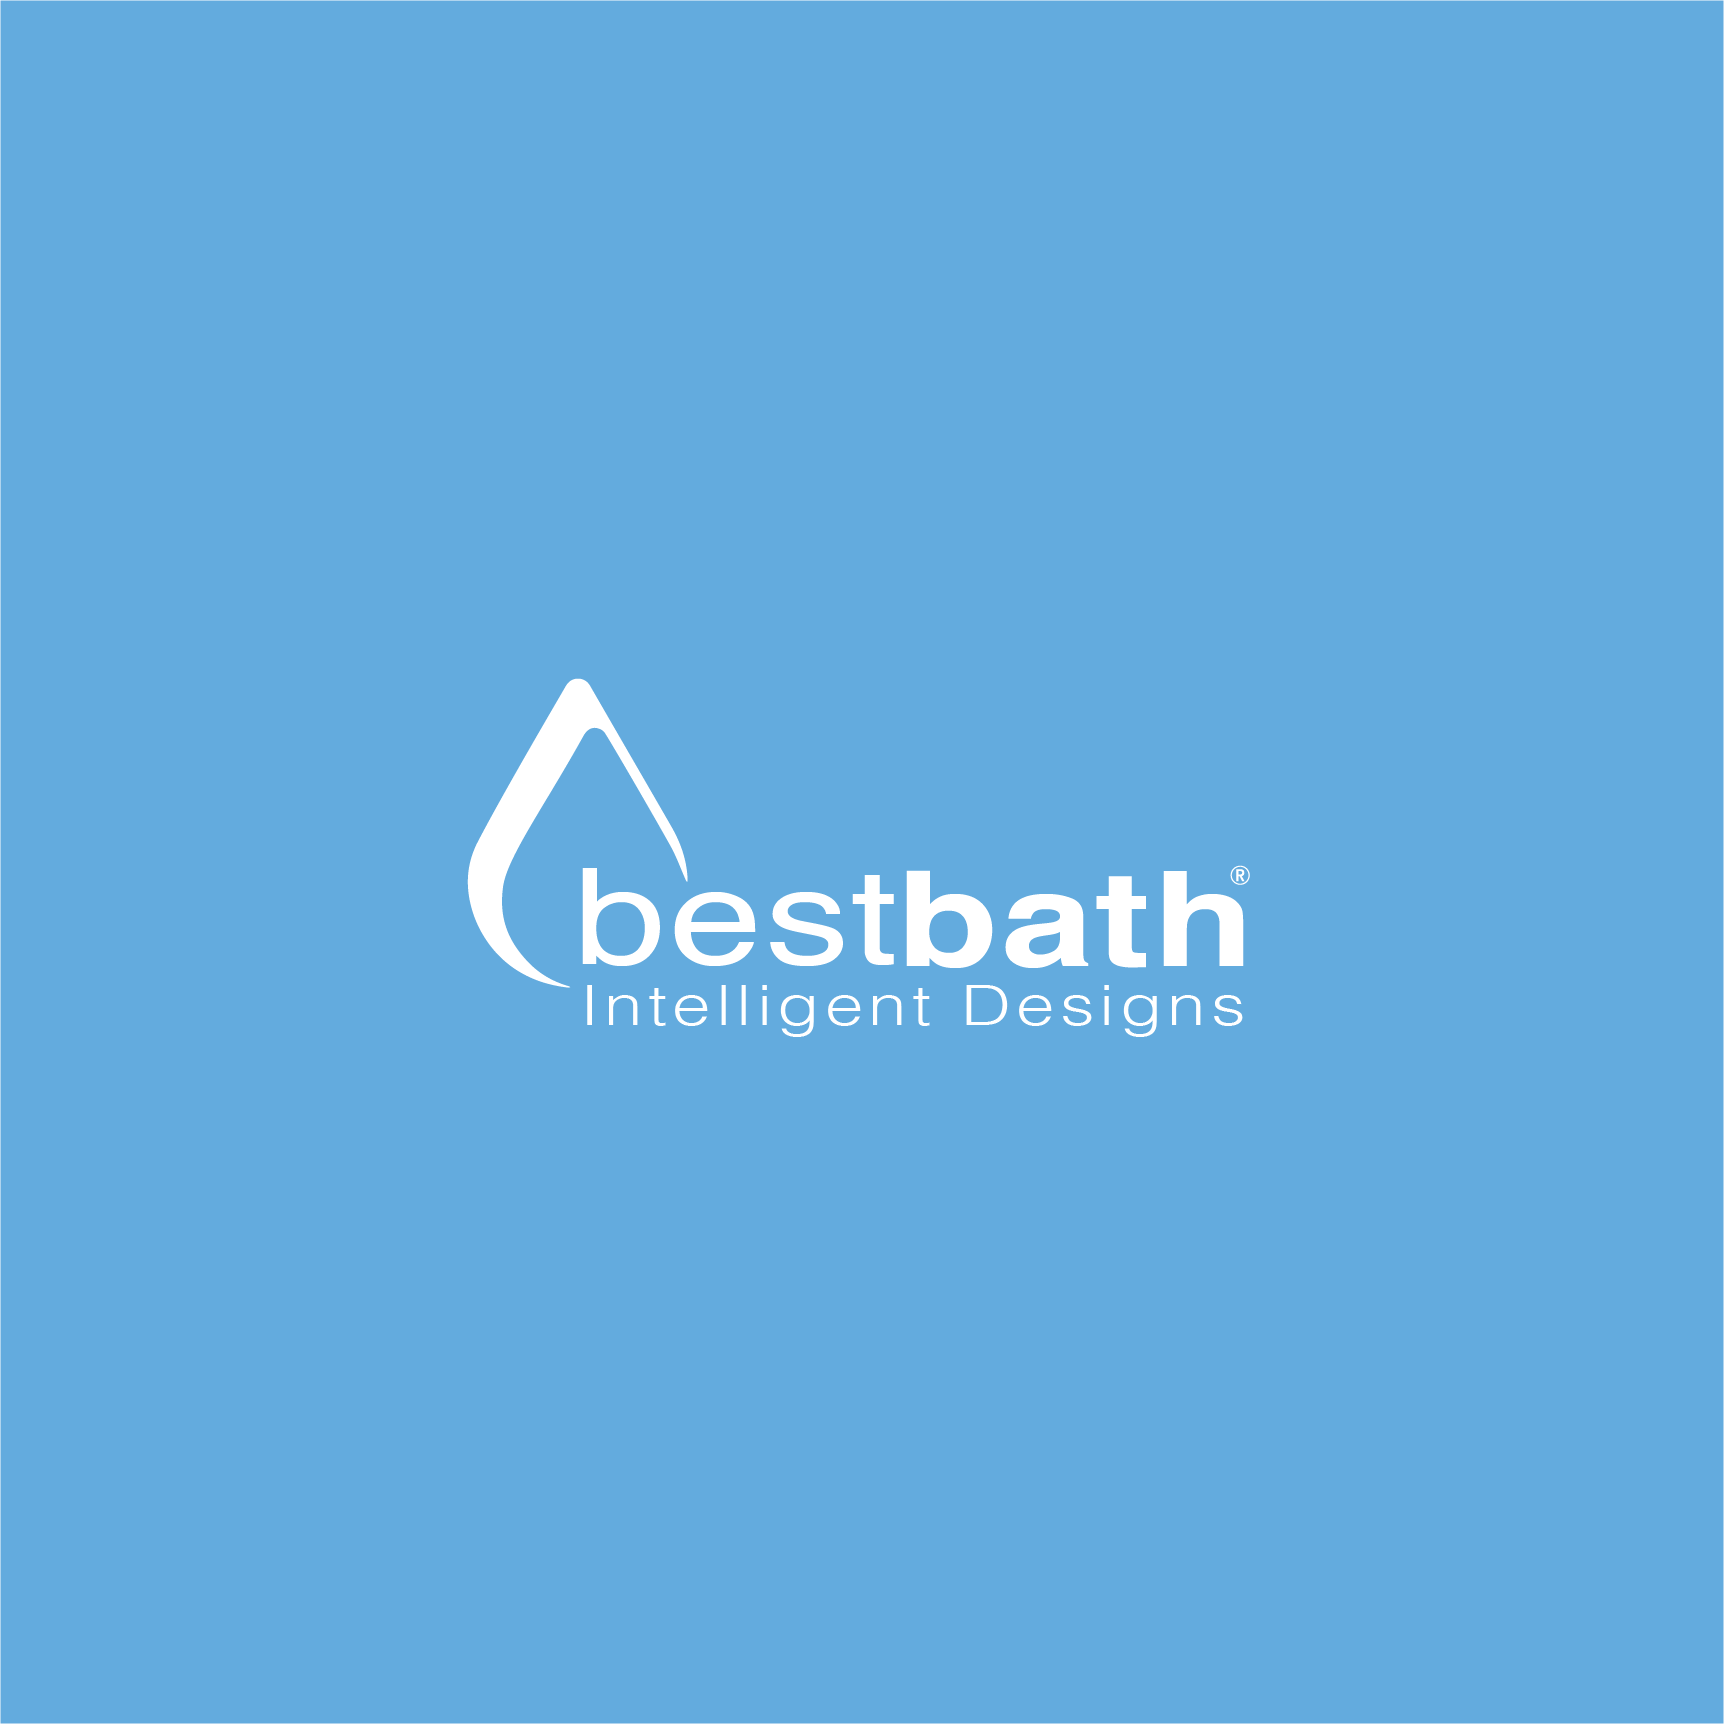 What Bestbath provides customers through custom design and customer service: A PCBC Conversation